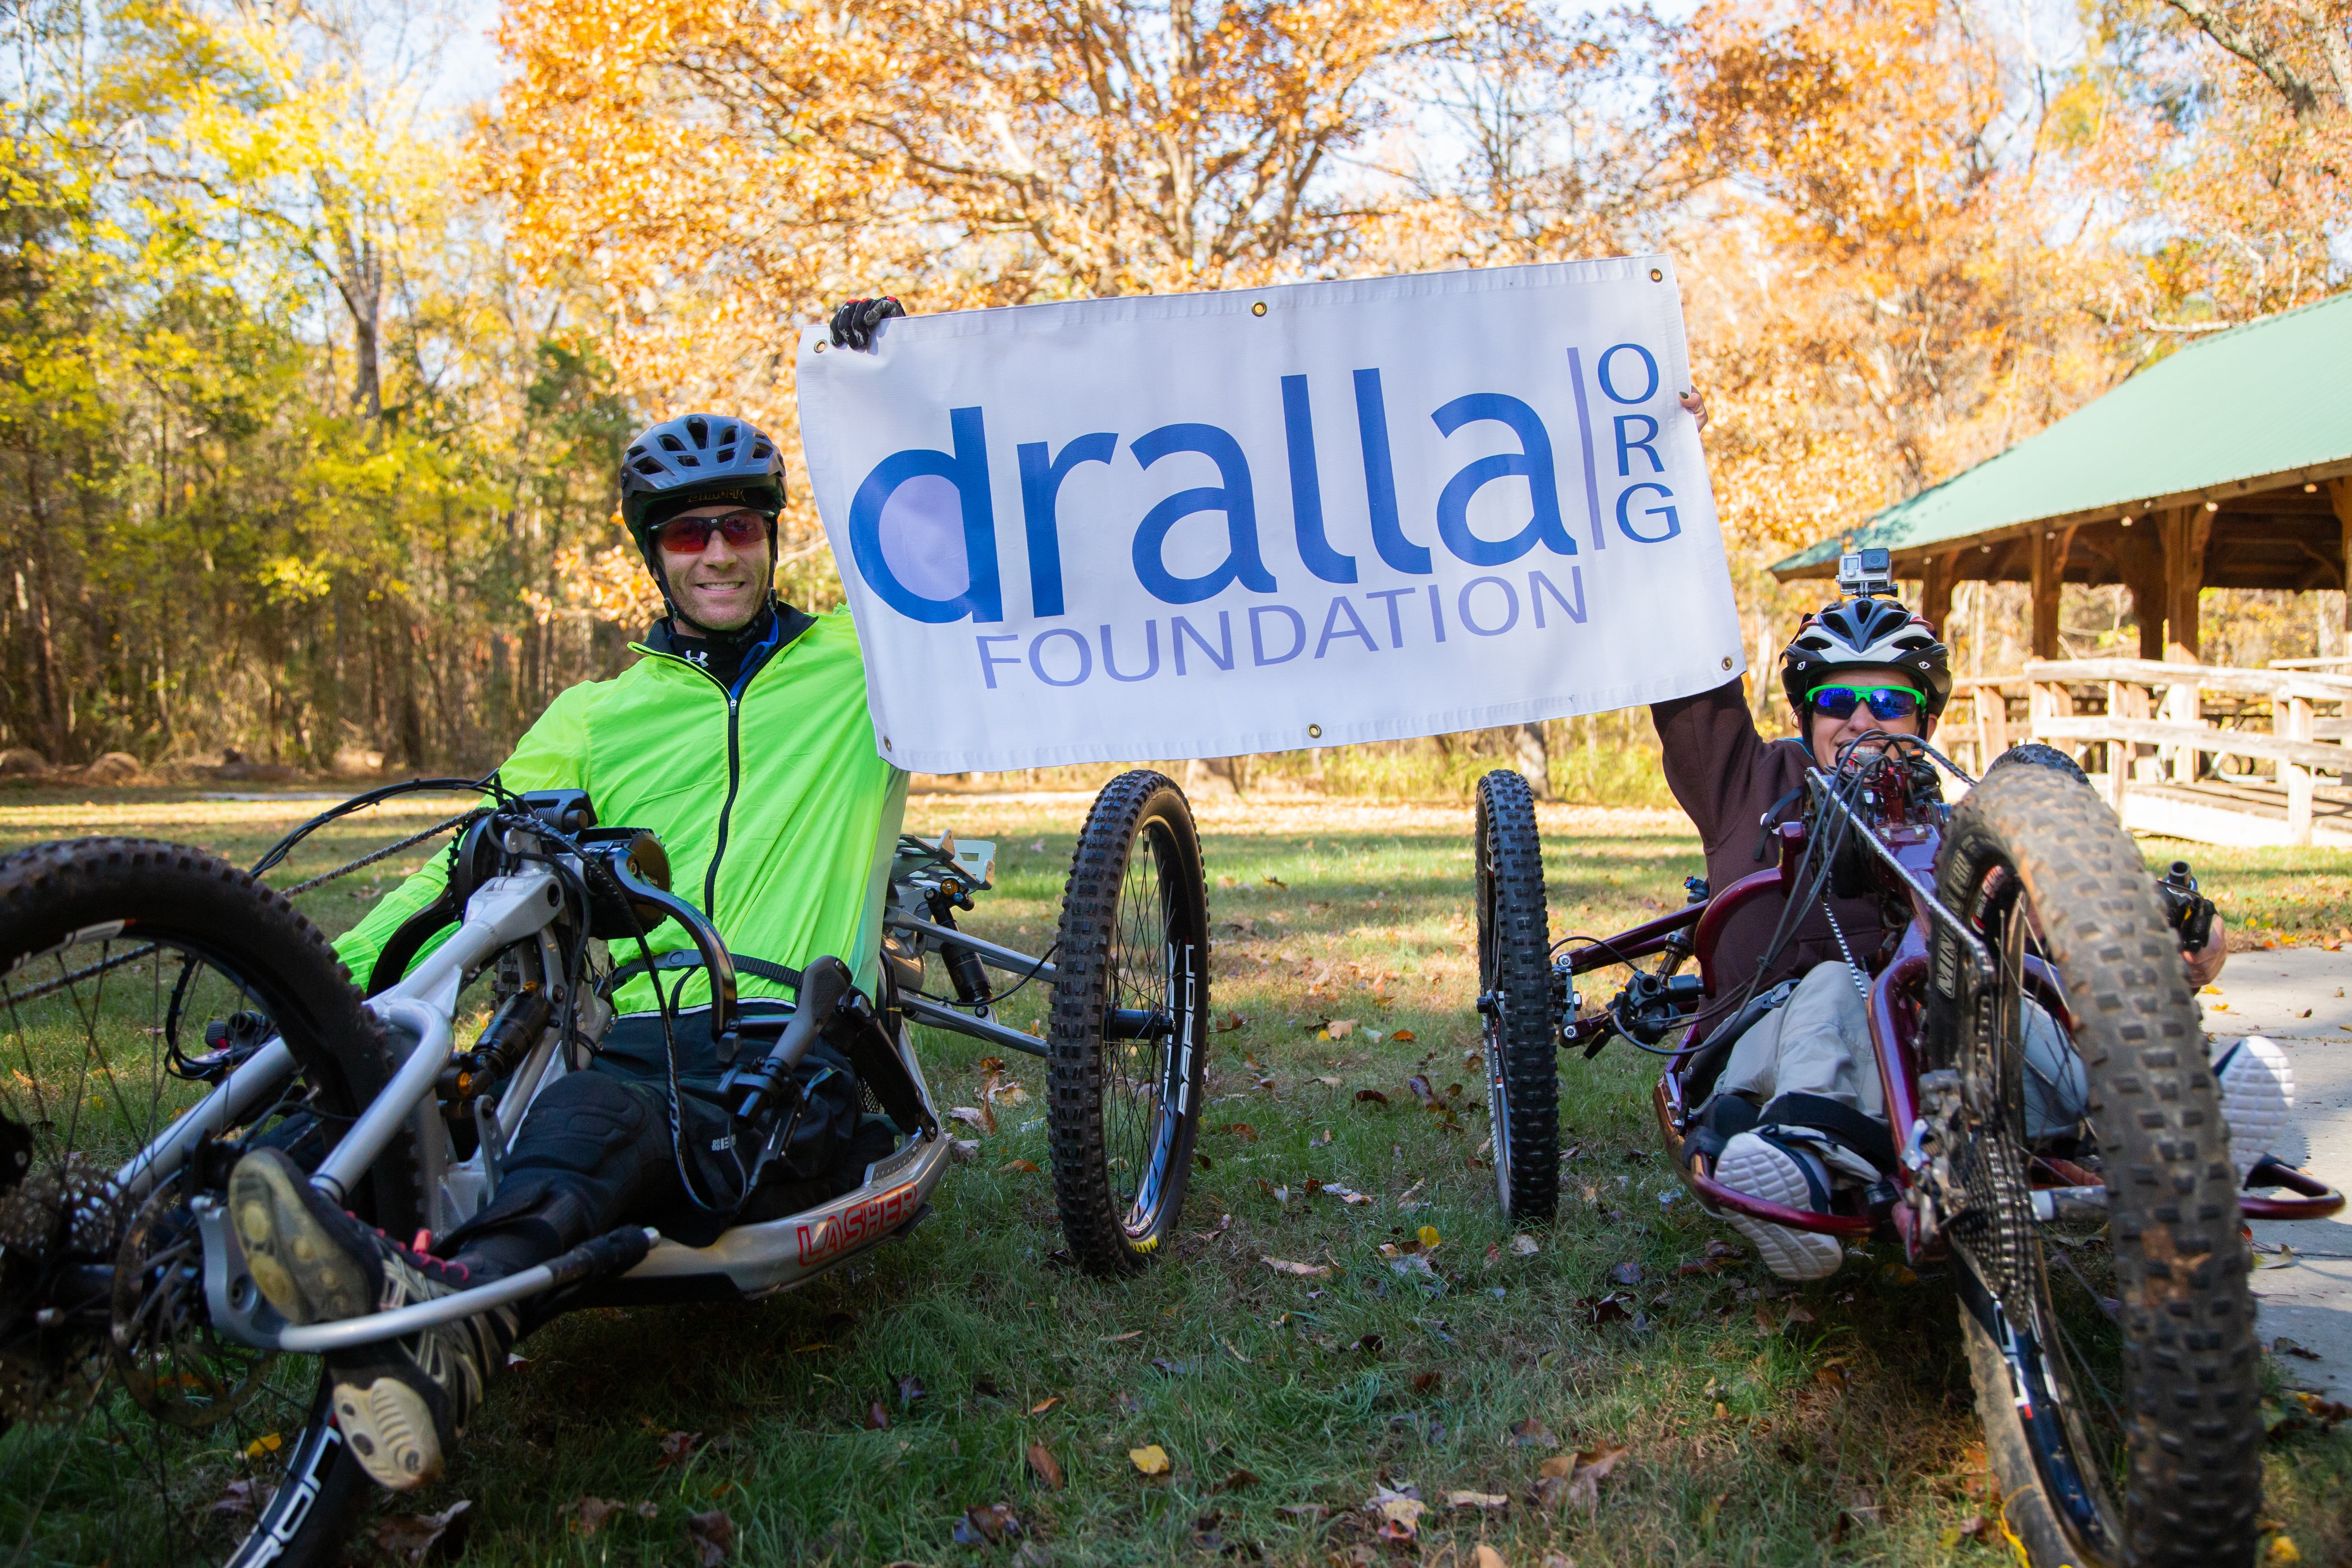 Dralla Foundation Makes Unforgettable Days Possible in Knoxville and Greensboro